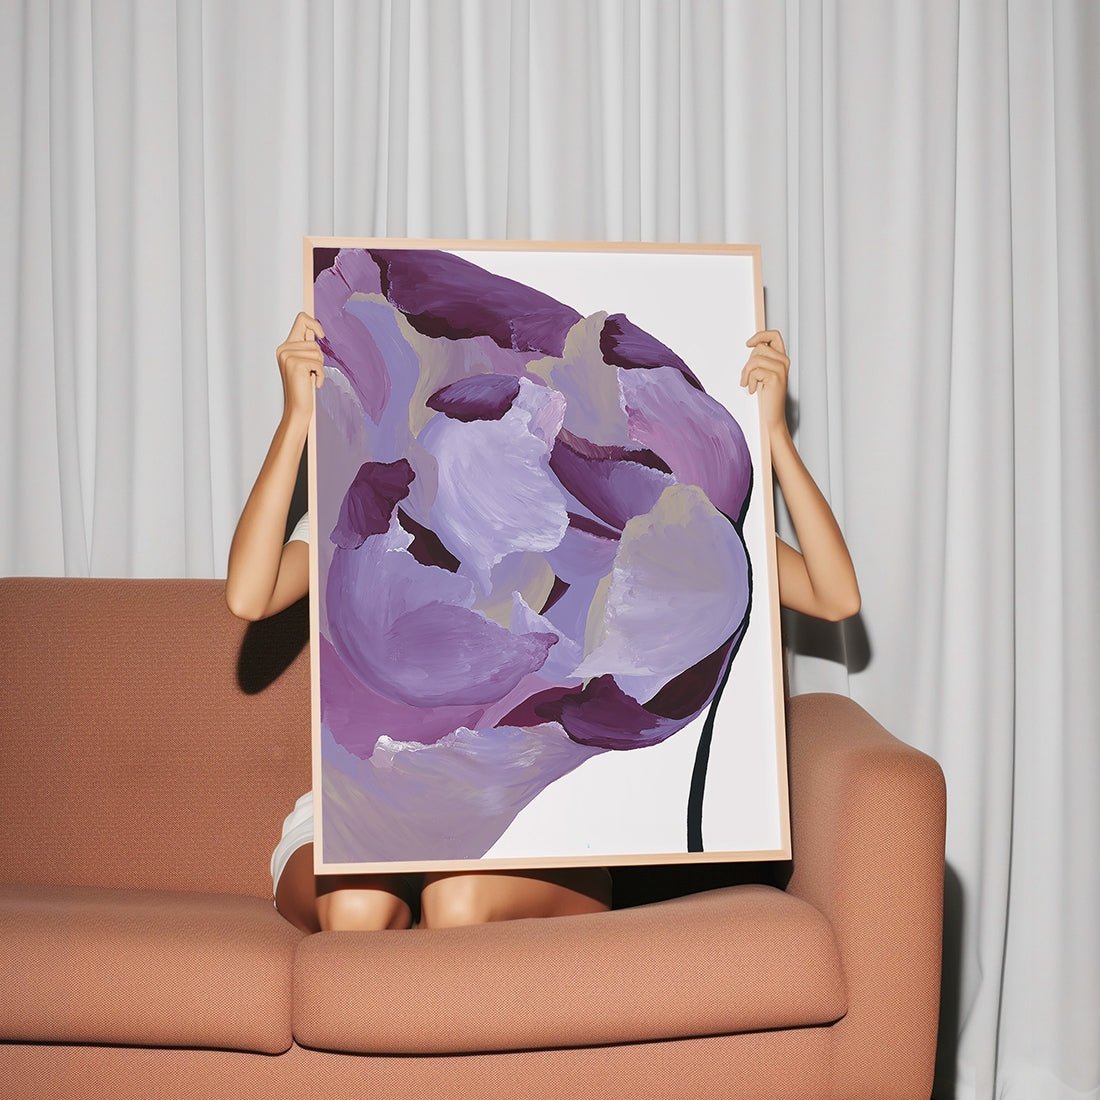 Woman holding large purple abstract painting with muted gold accents for eclectic interiors.